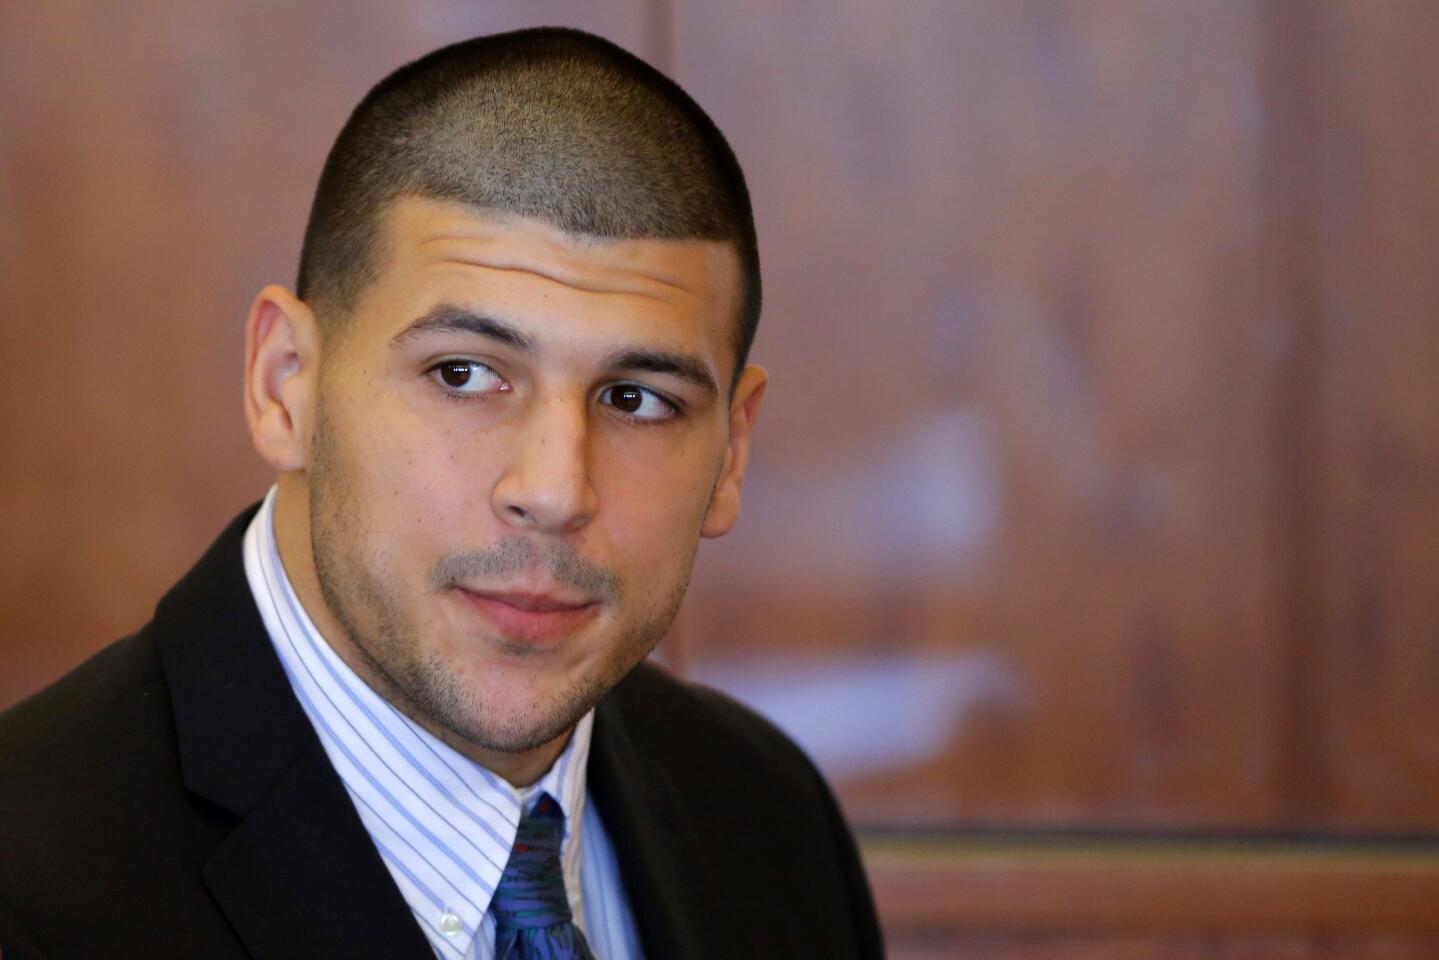 Aaron Hernandez, former player for the NFL's New England Patriots football team, attends a pre-trial hearing at the Bristol County Superior Court in Fall River, Massachusetts October 9, 2013, in connection with the death of semi-pro football player Odin Lloyd in June. Hernandez, who was a rising star in the NFL before his arrest and release by the Patriots, has pleaded not guilty.